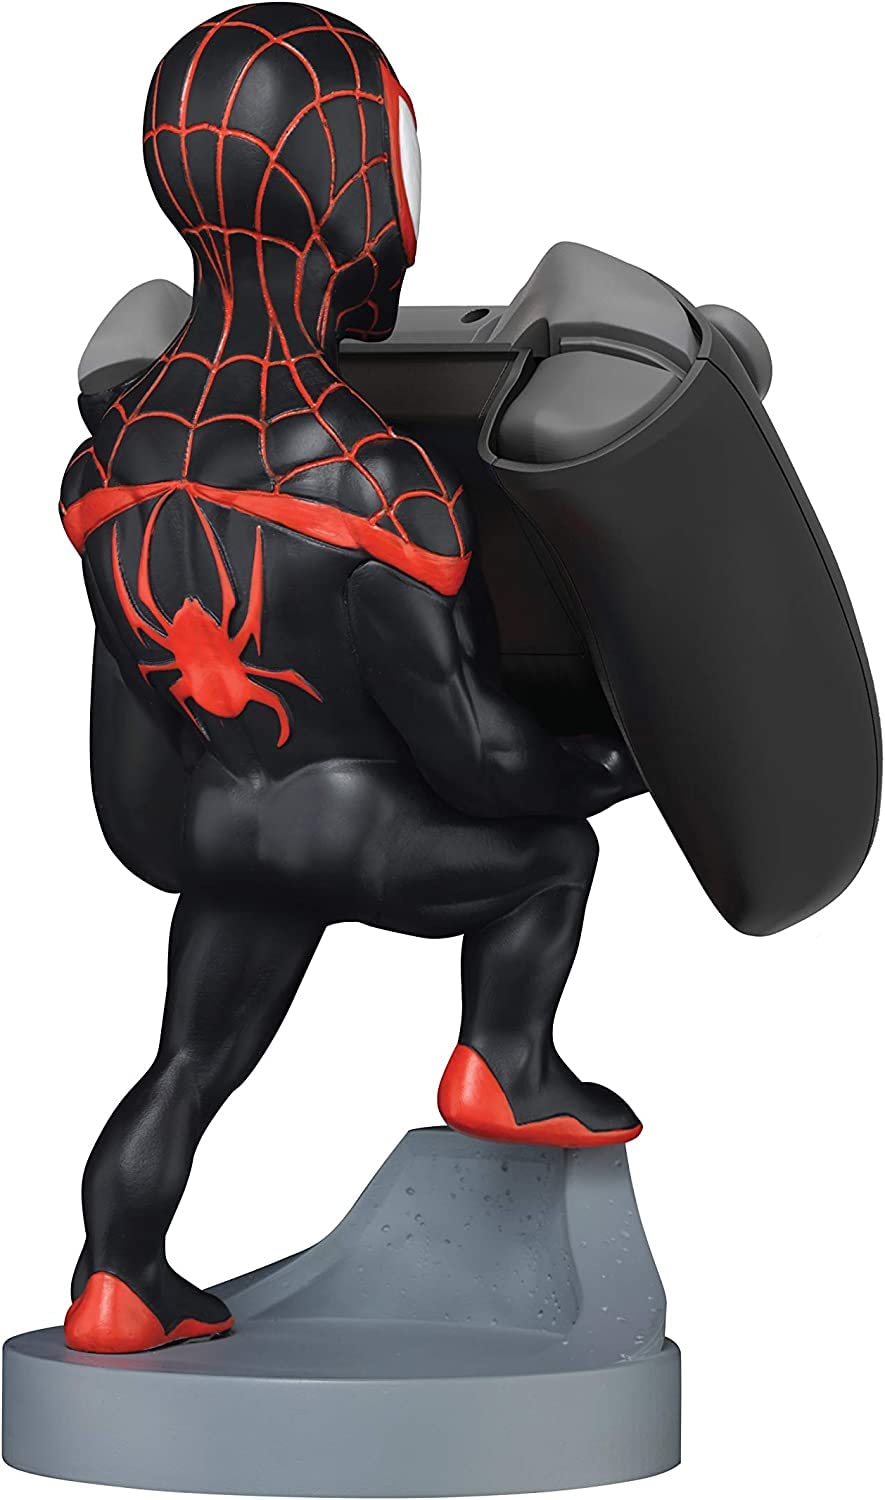 Exquisite Gaming Cable Guy - Marvel Spiderverse: Miles Morales Spiderman - Charging Controller and Device Holder - Toy - Xbox 360